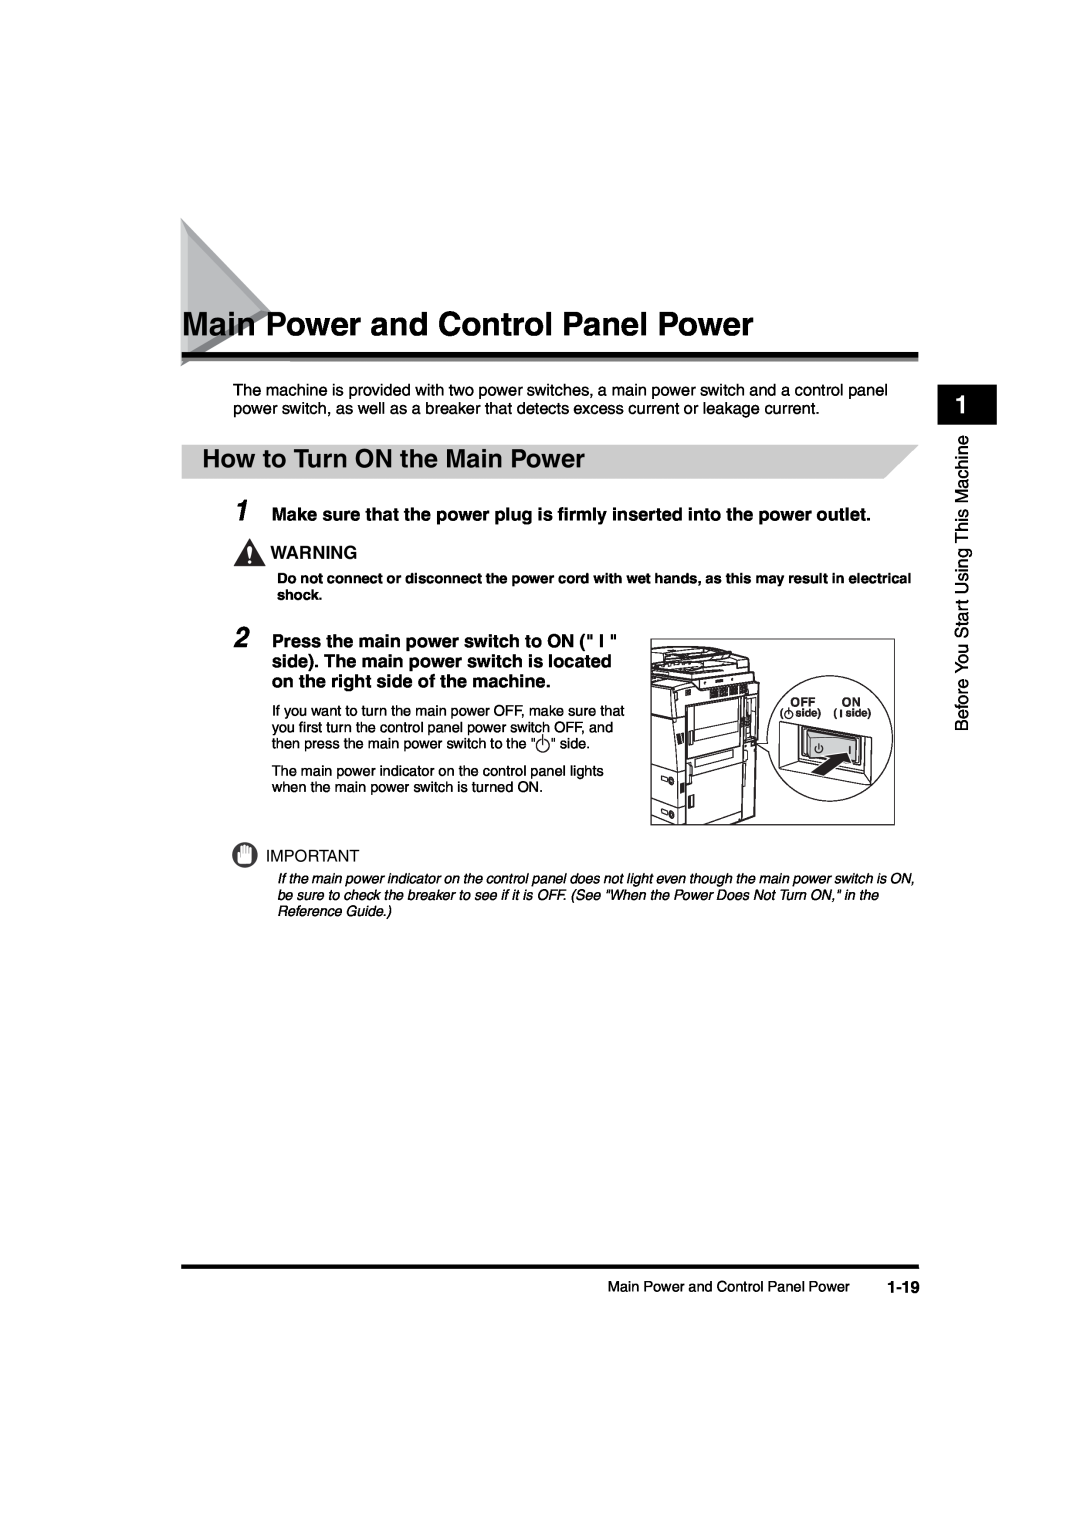 Canon iR6570 manual Main Power and Control Panel Power, How to Turn ON the Main Power 